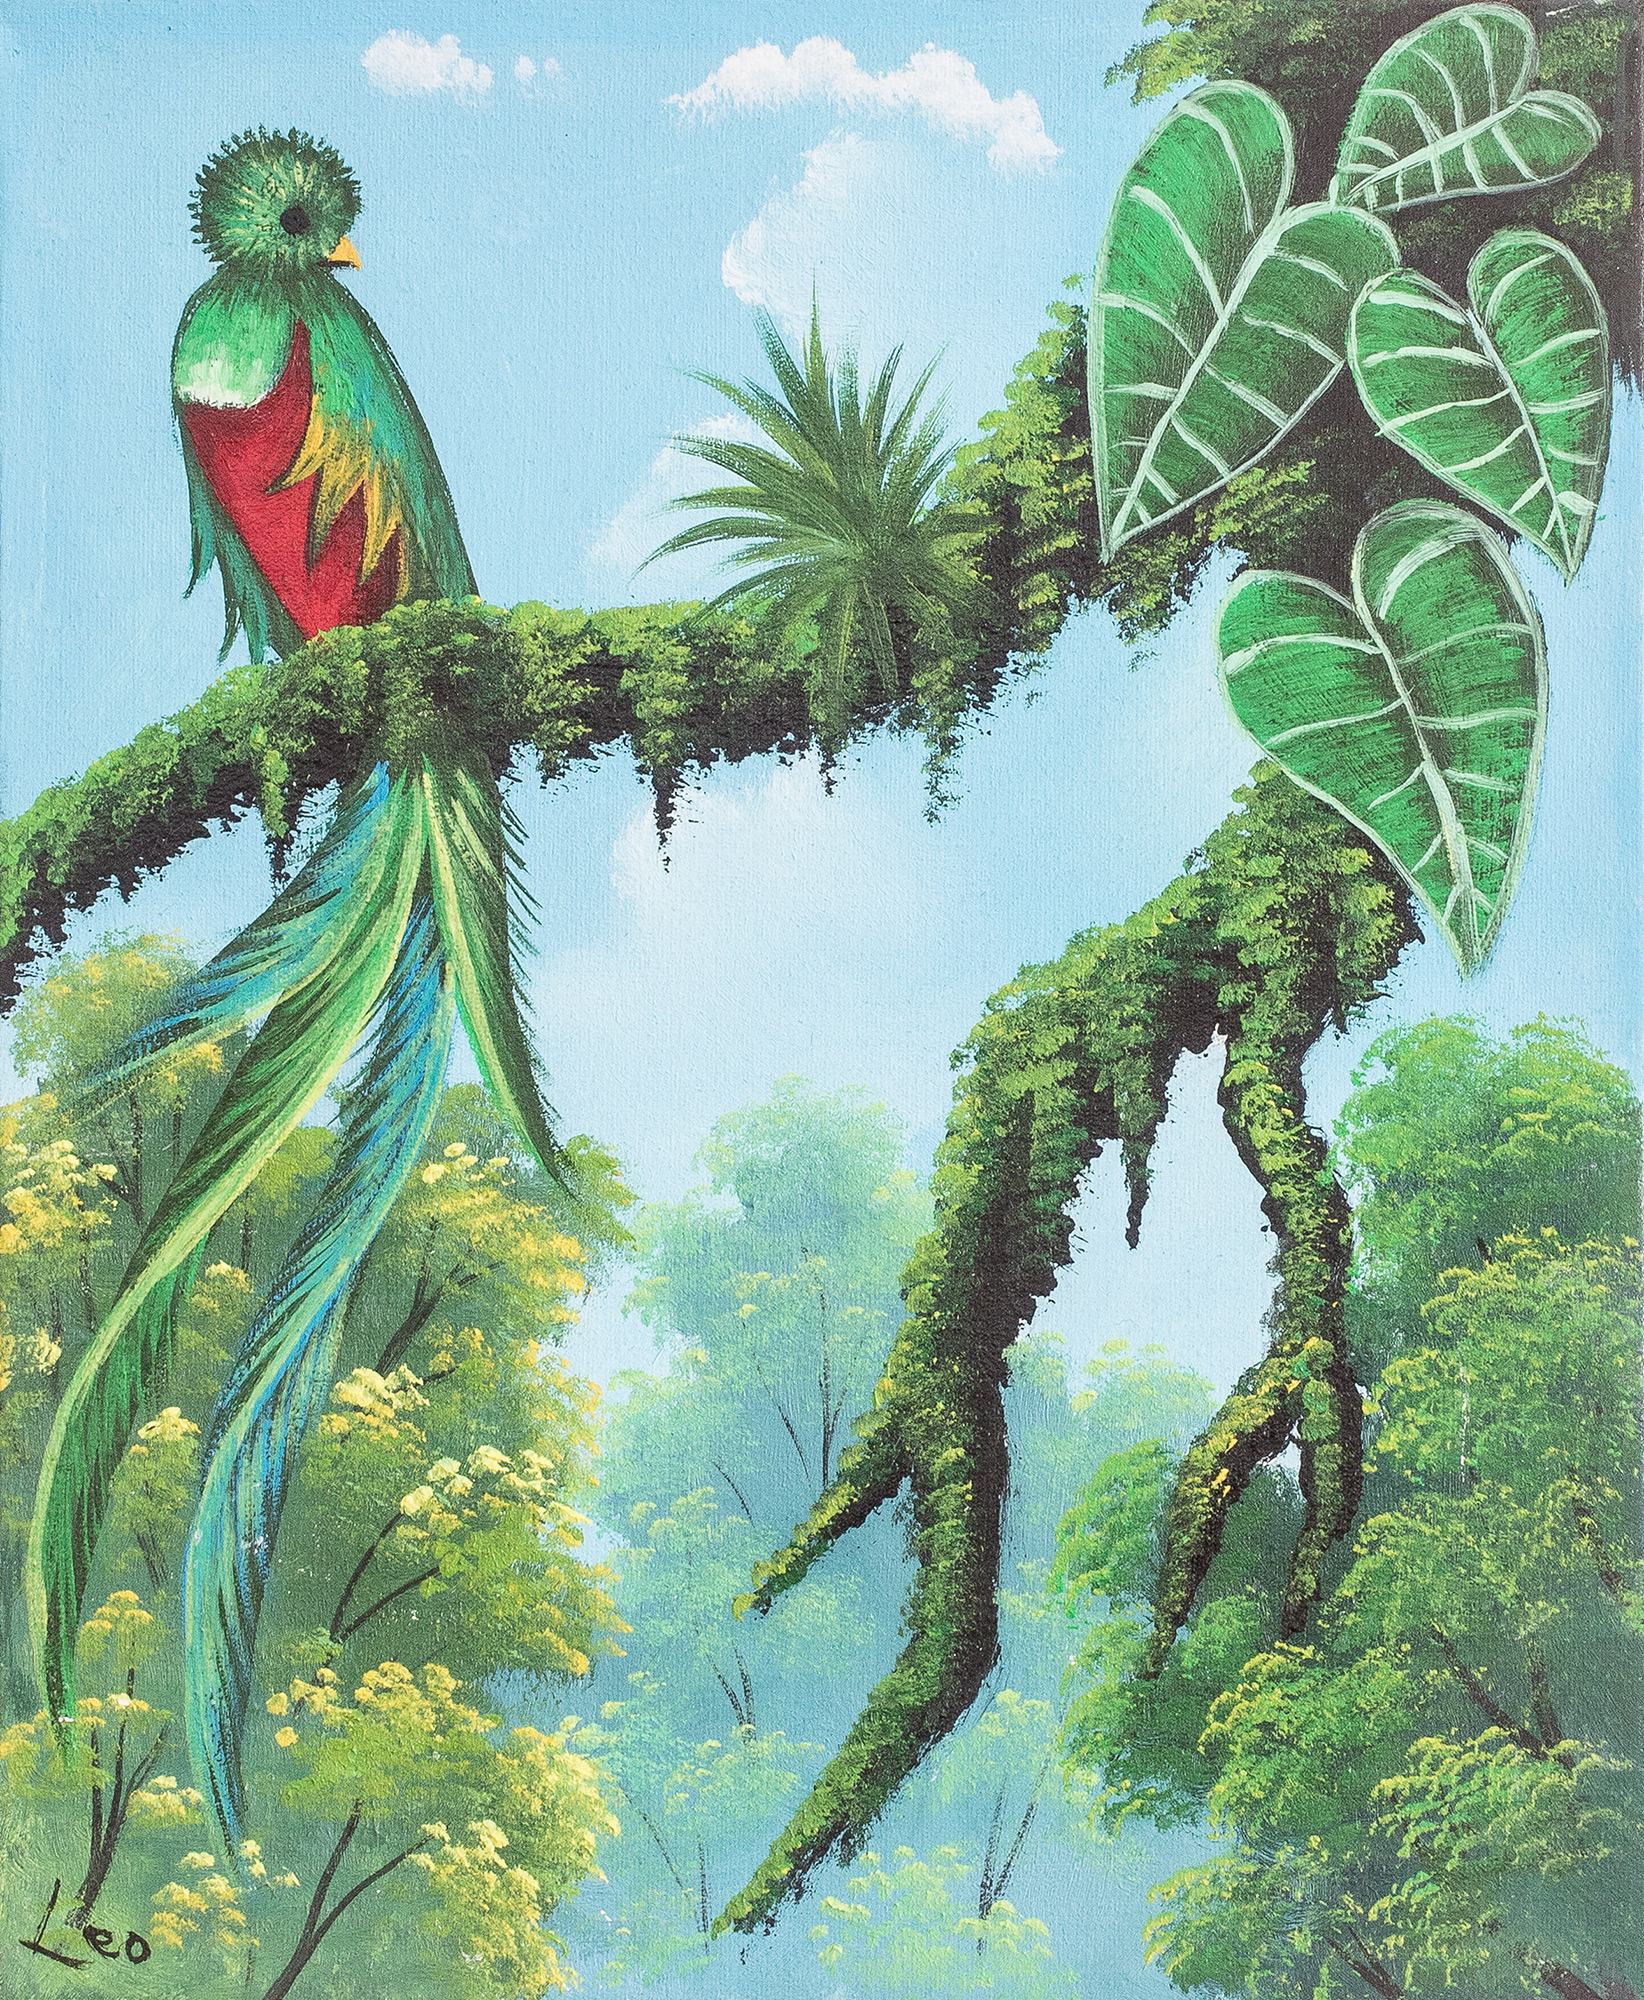 Learn to Paint two Macaws in a Tropical Forest!